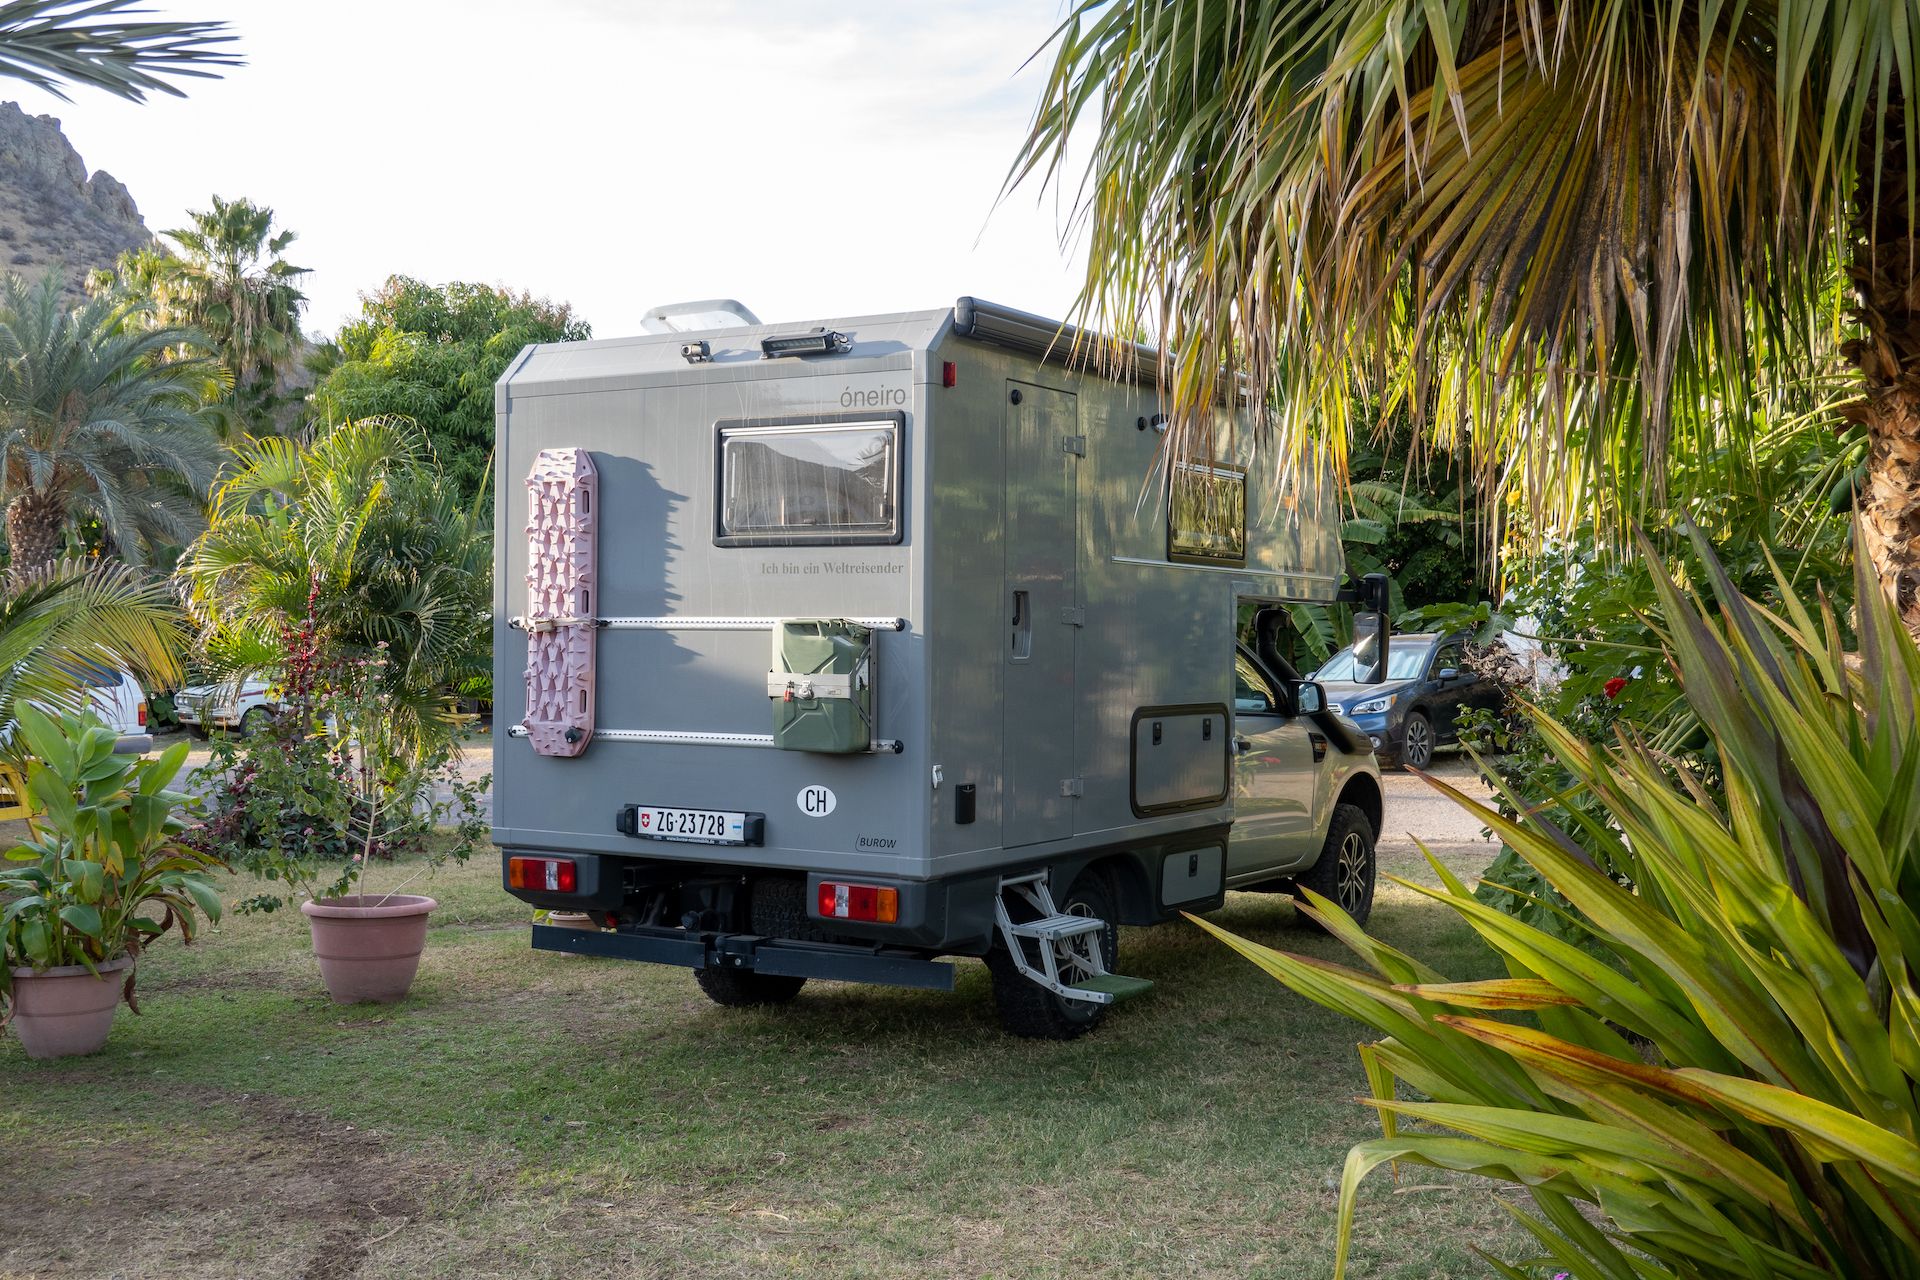 We spotted a few European travelers in the past few days, including this couple from Switzerland traveling with their beautiful and modern camper based on Ford Ranger. We wish this type of smaller campers were available in the US…